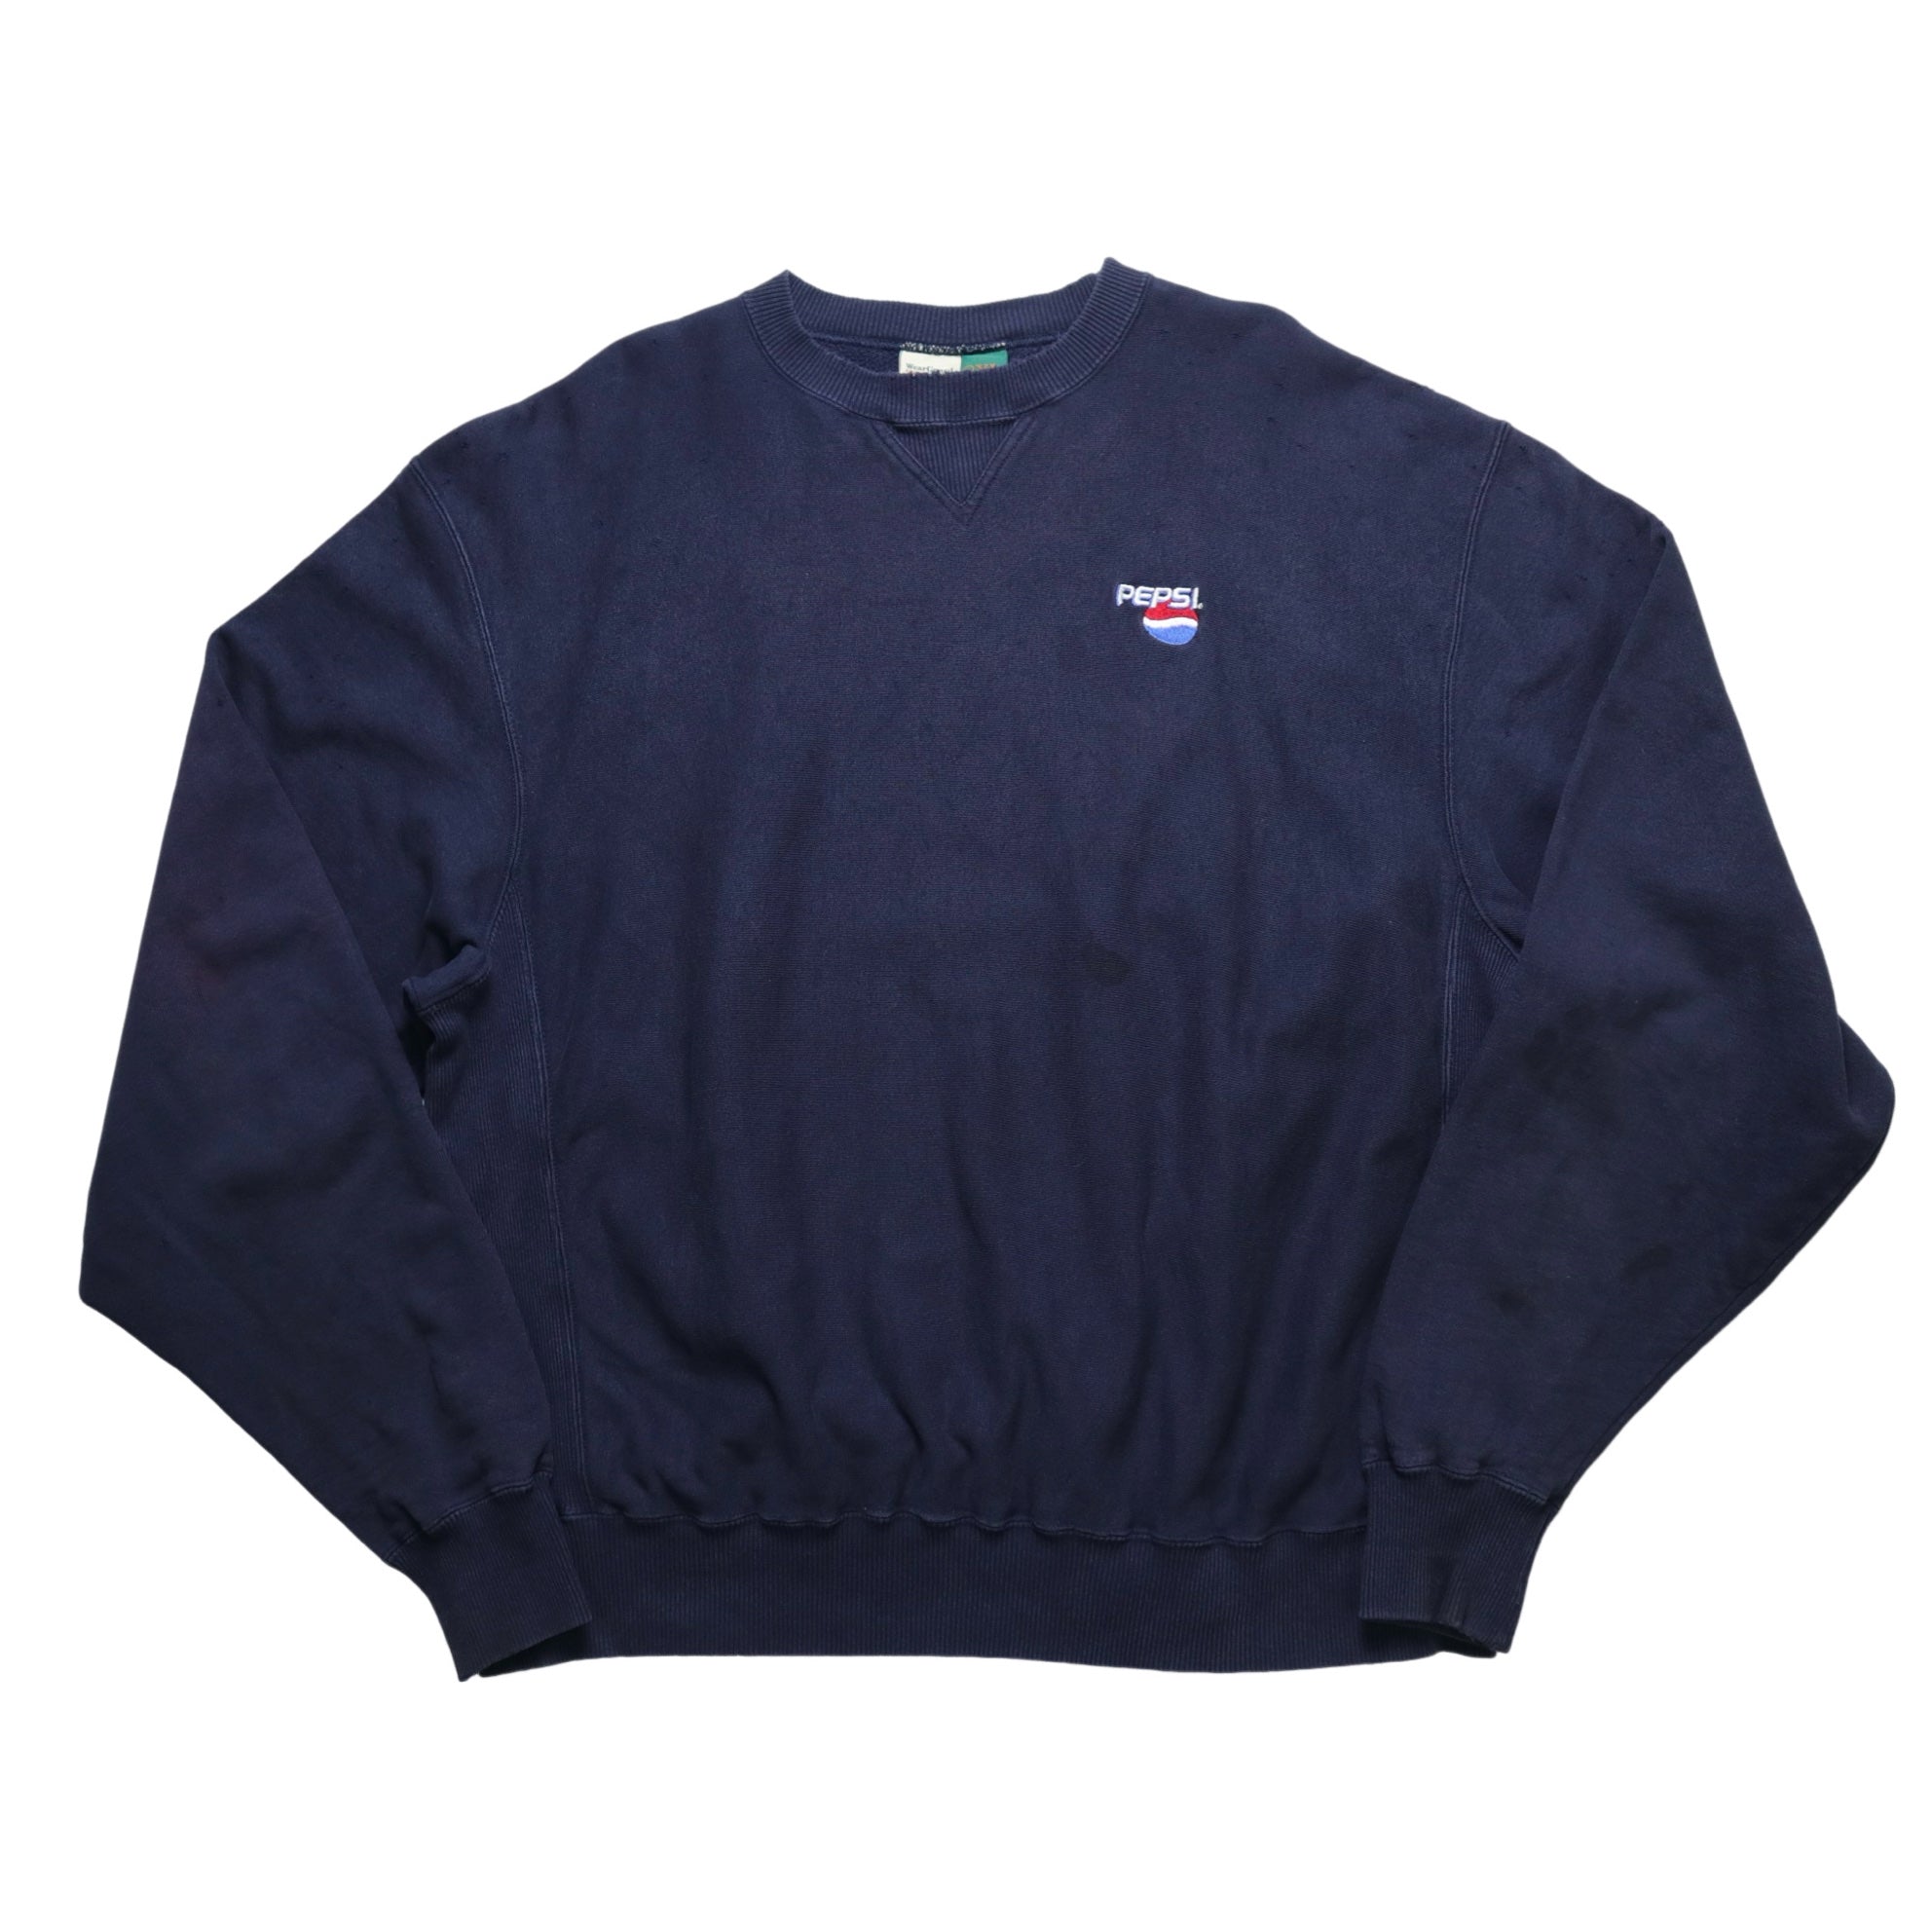 90s Canadian-made Pepsi-Cola plain sweatshirt, damaged by the wind